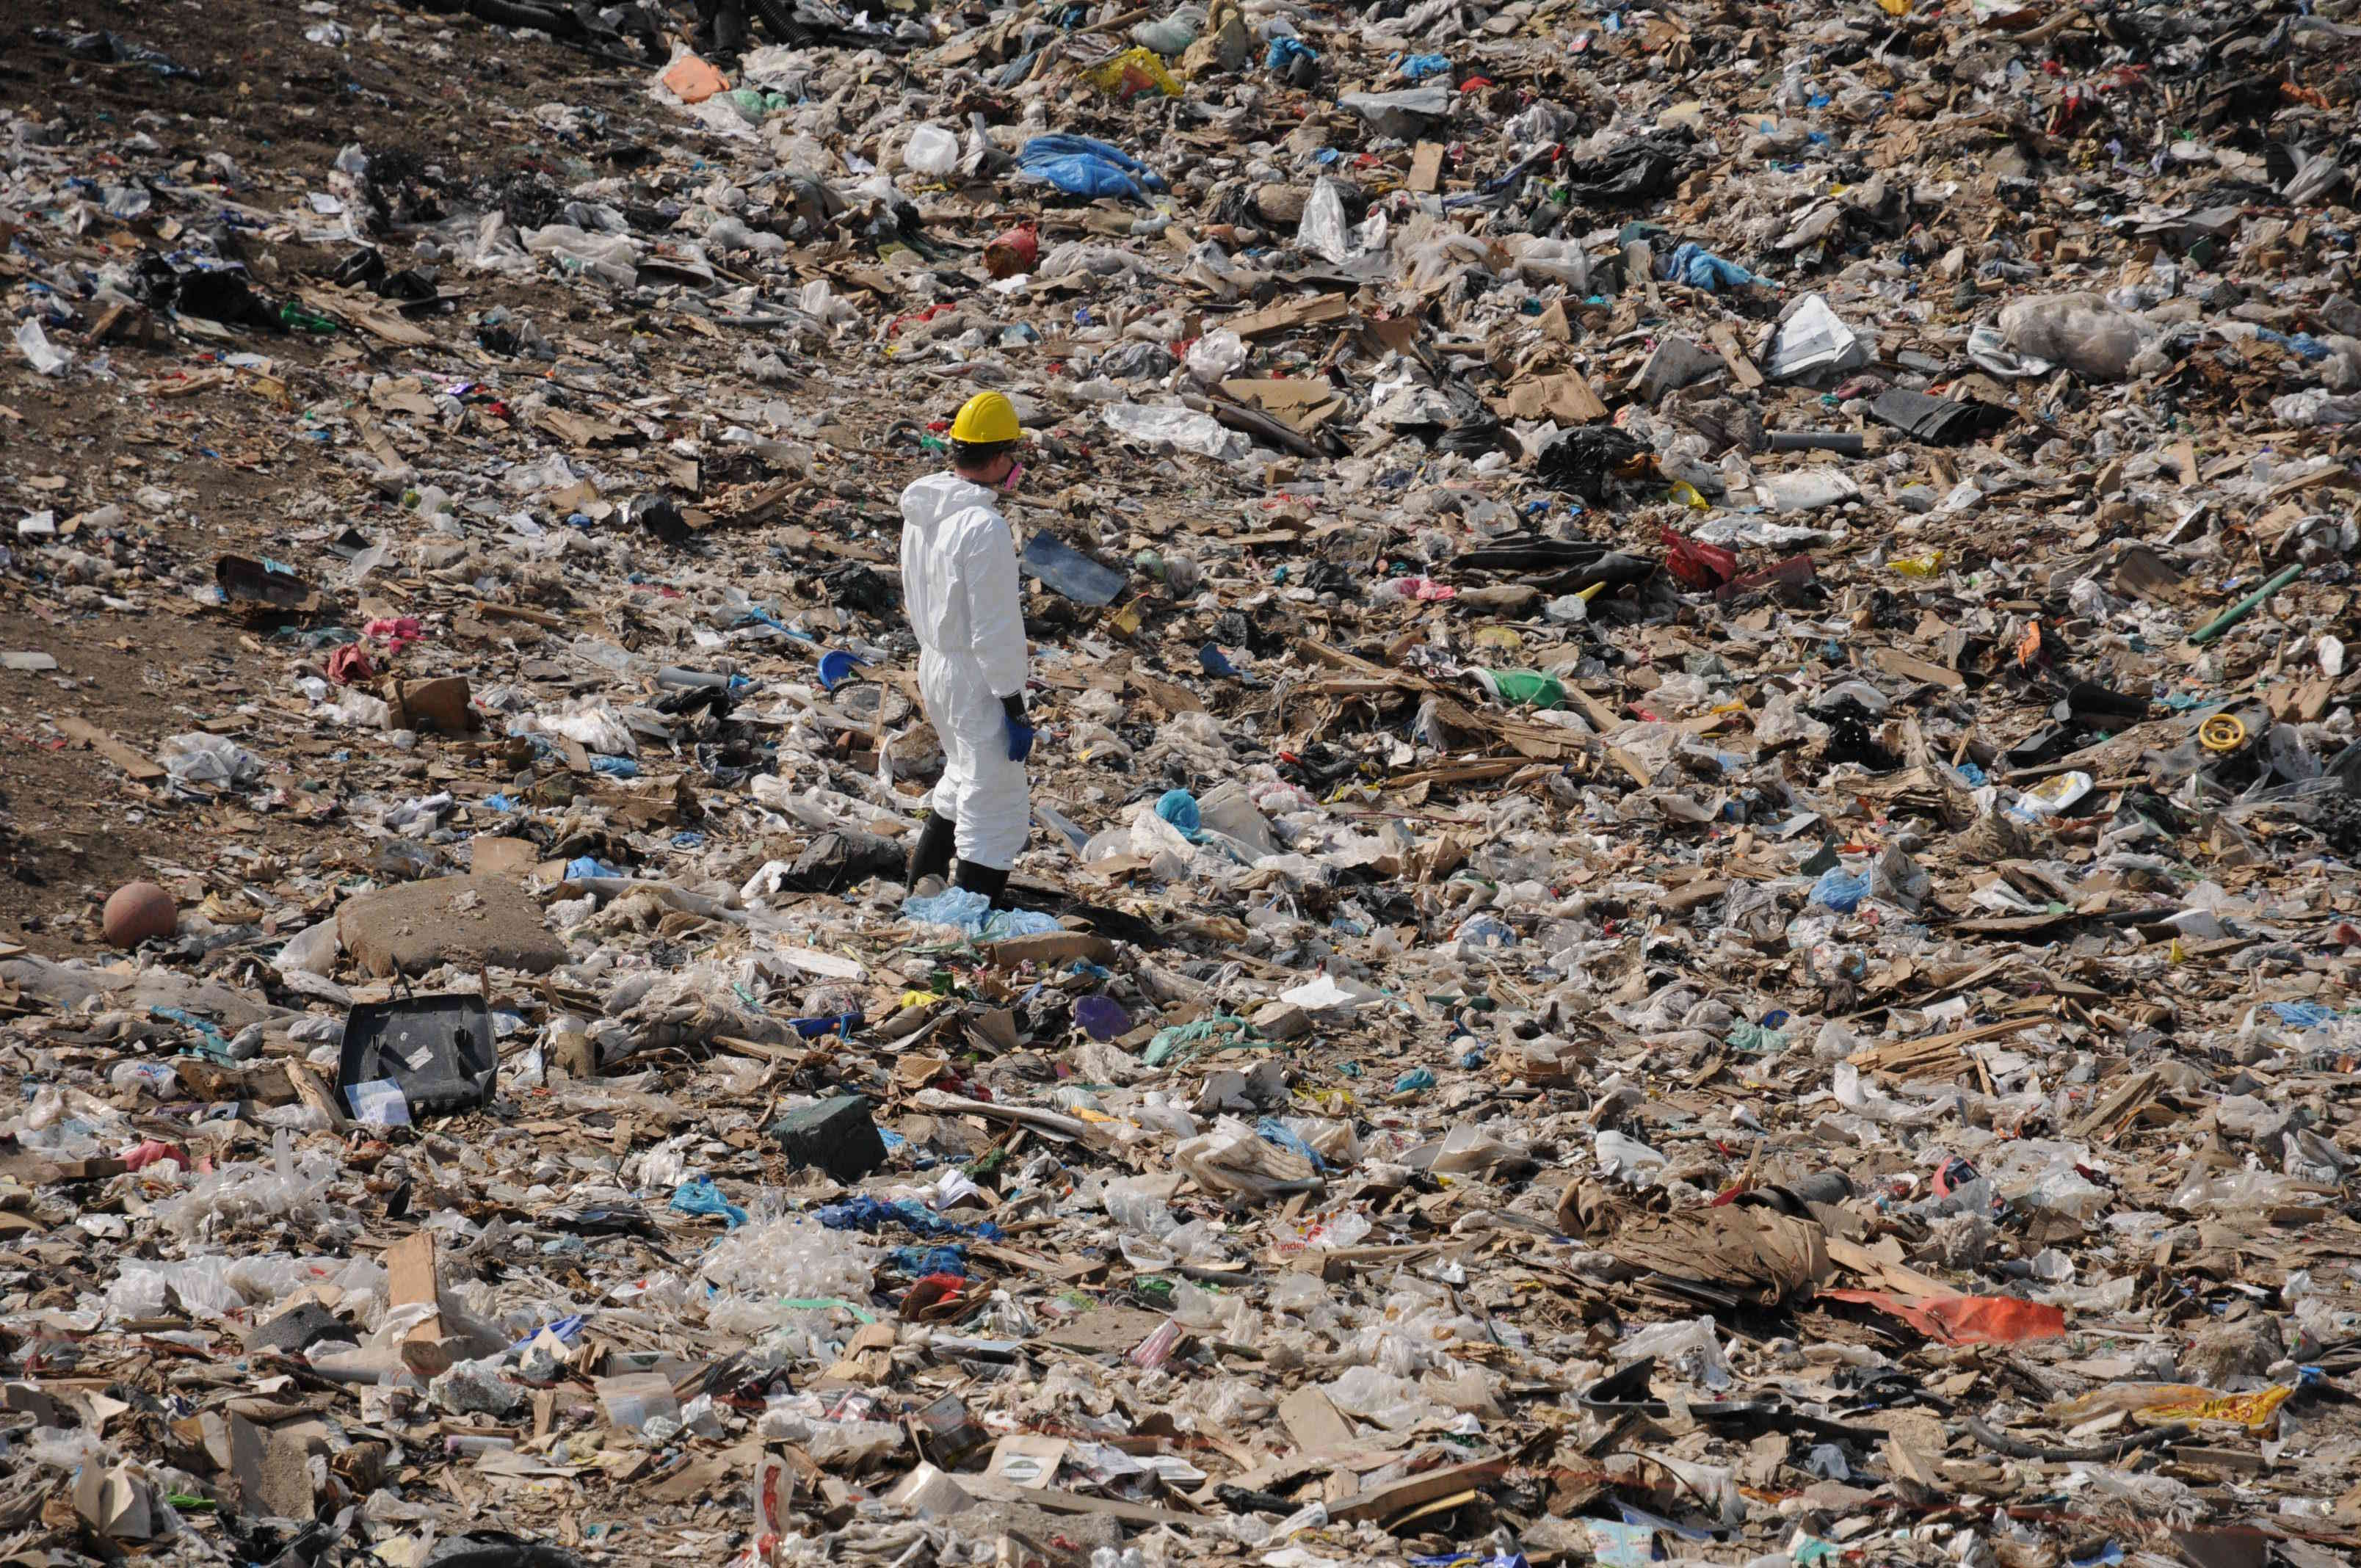 A search member in personal protective equipment stands amongst the garbage that was being searched for Kandice Singbeil.